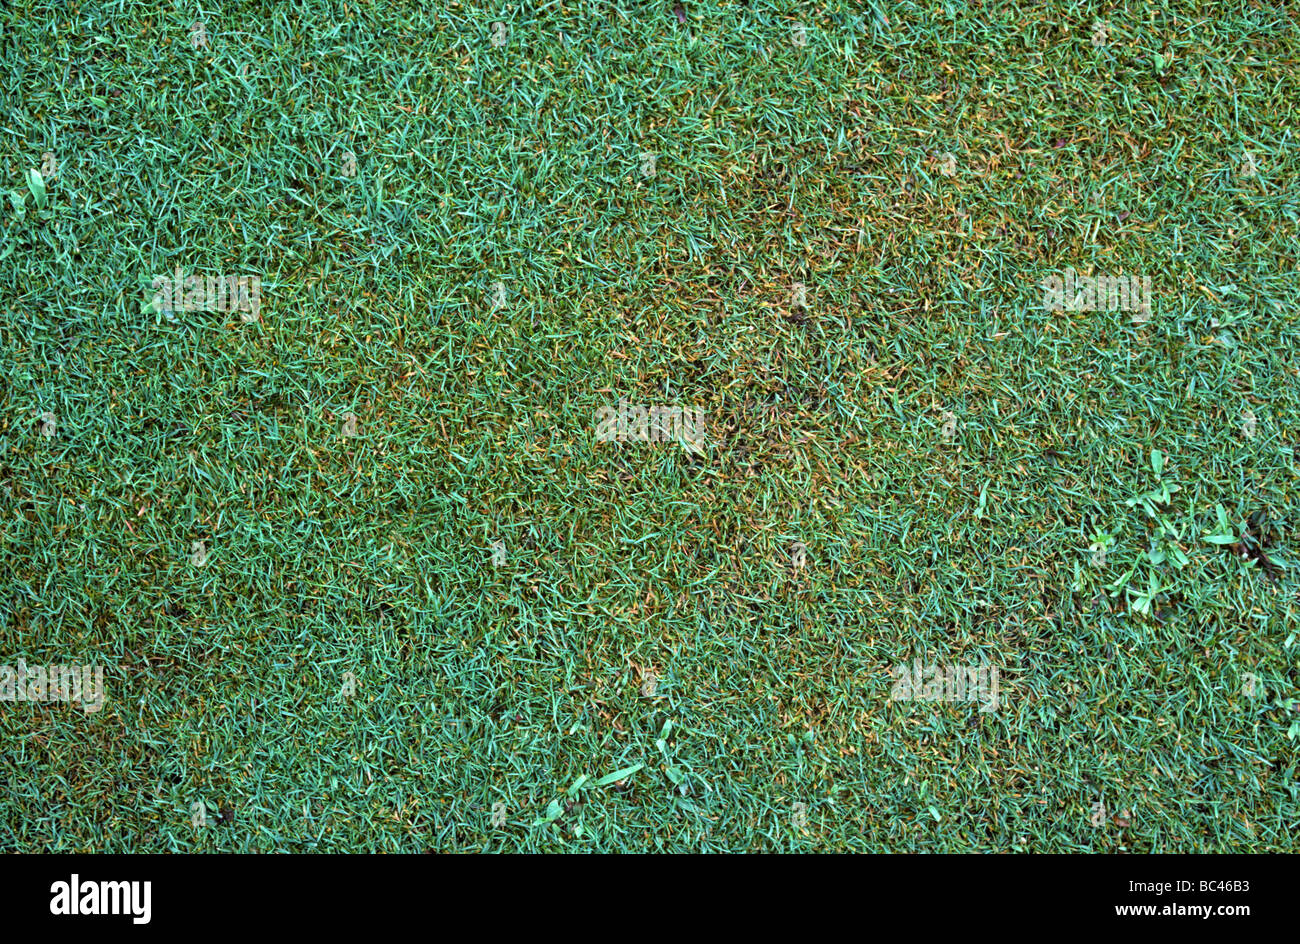 Brown patch Rhizoctonia solani on short golf green turf grass Stock Photo